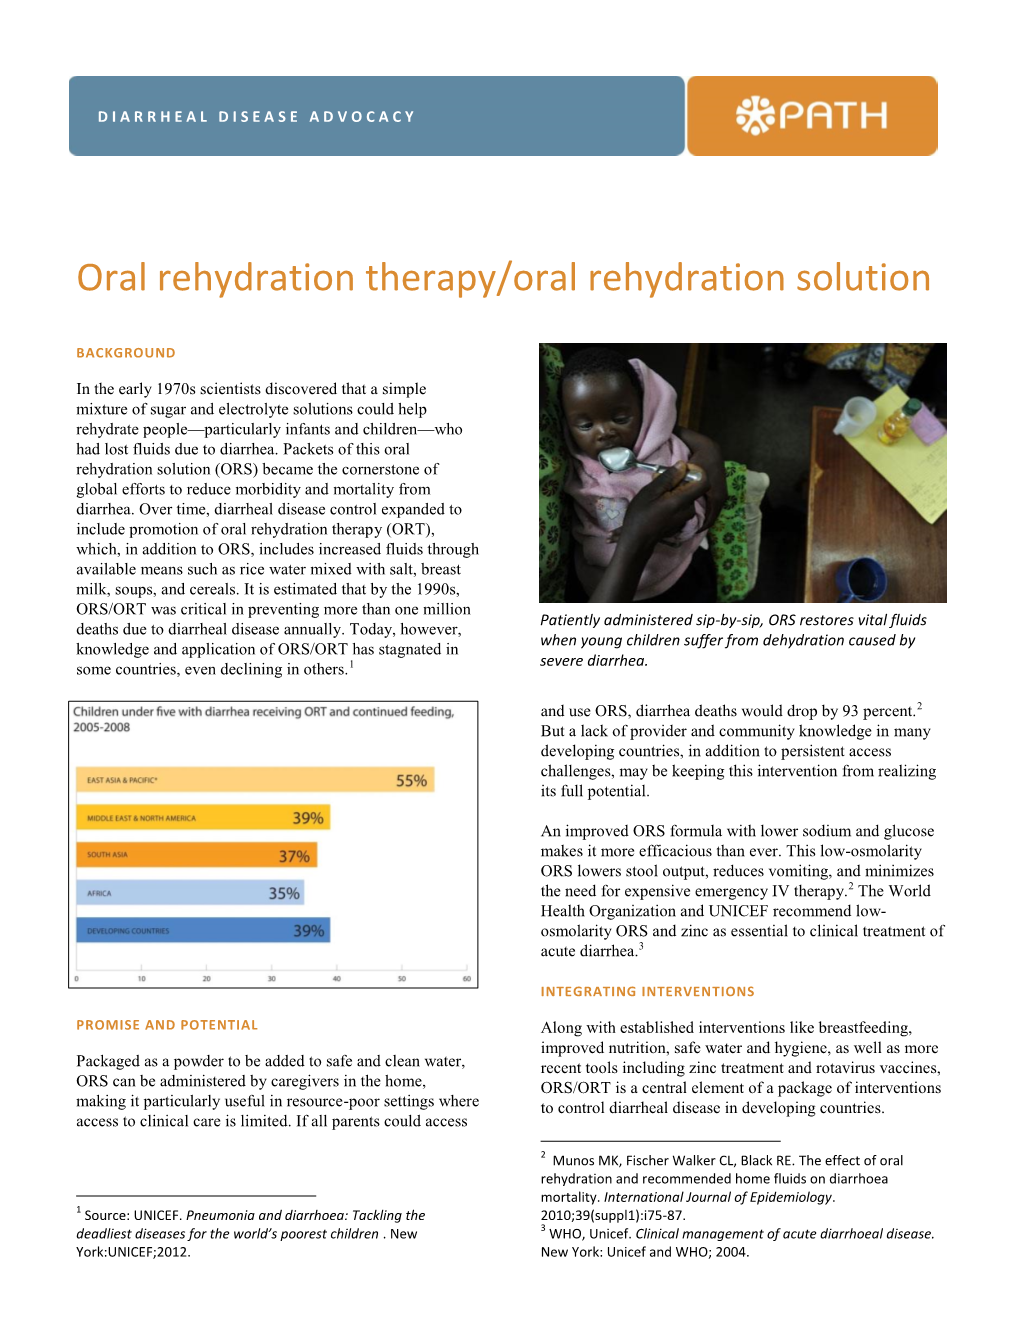 Oral Rehydration Therapy/Oral Rehydration Solution